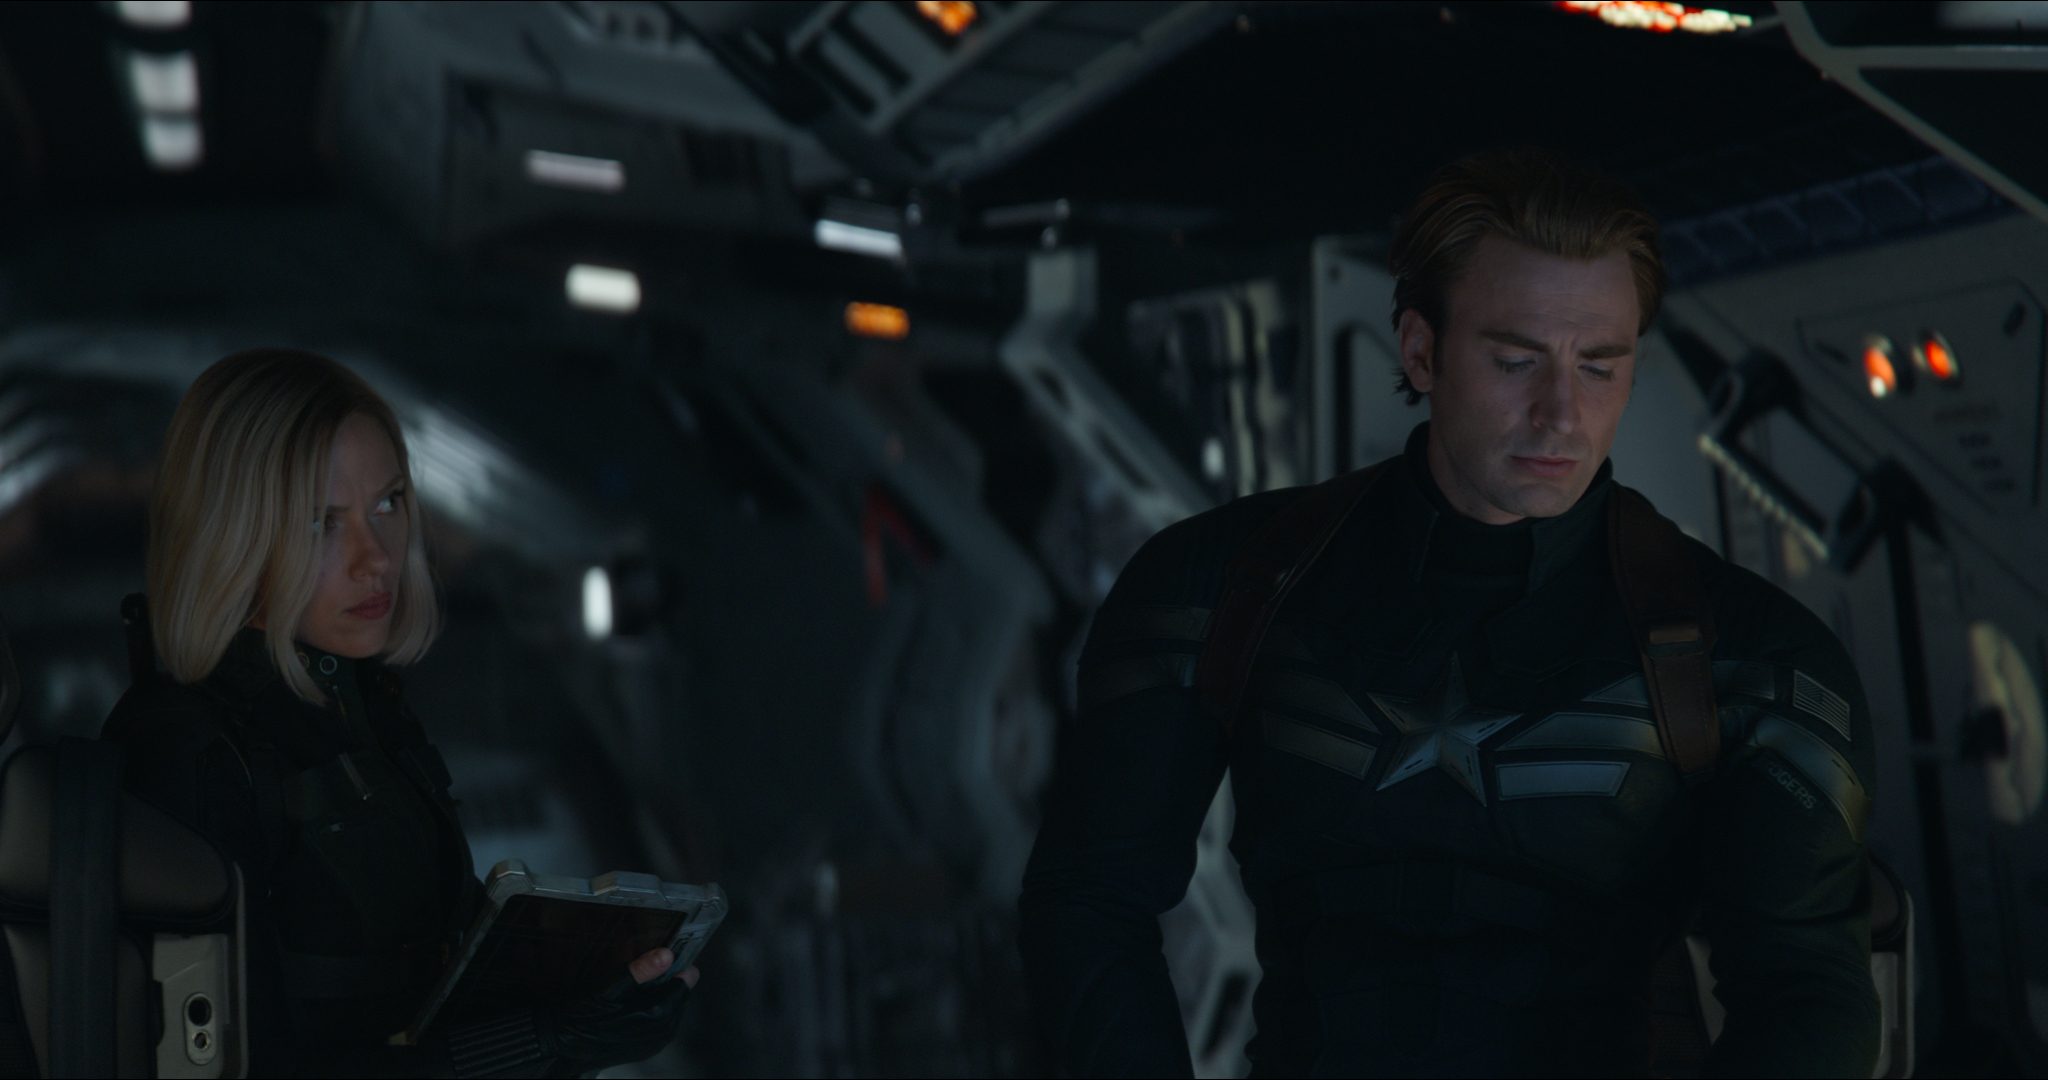 Avengers: Endgame High-Res Images Offer Look At Heroes 